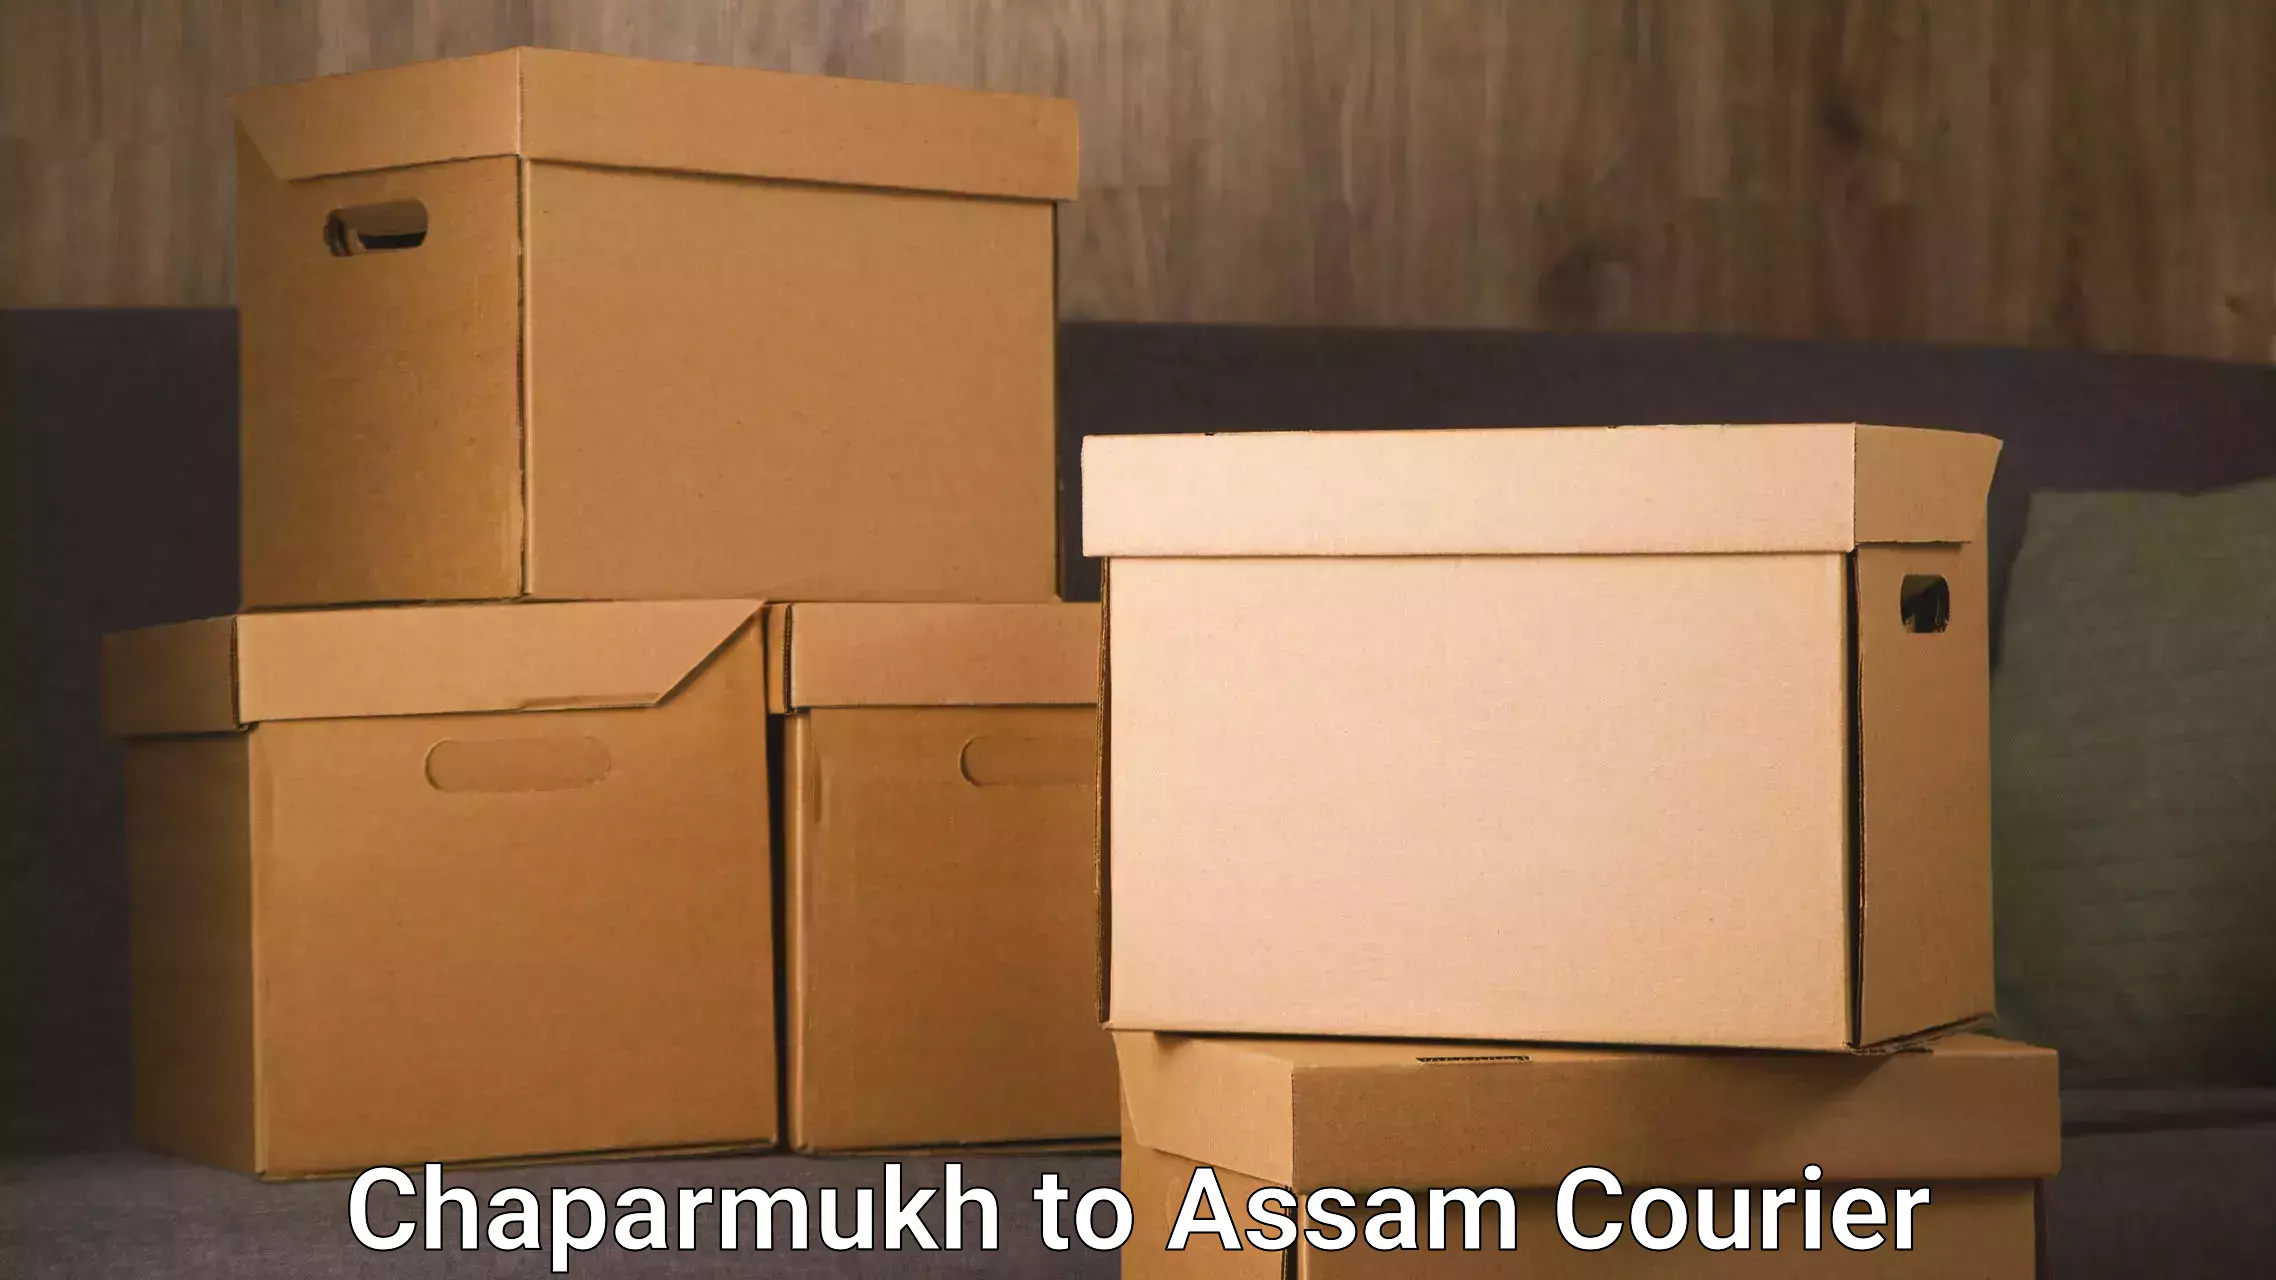 Reliable package handling Chaparmukh to Marigaon